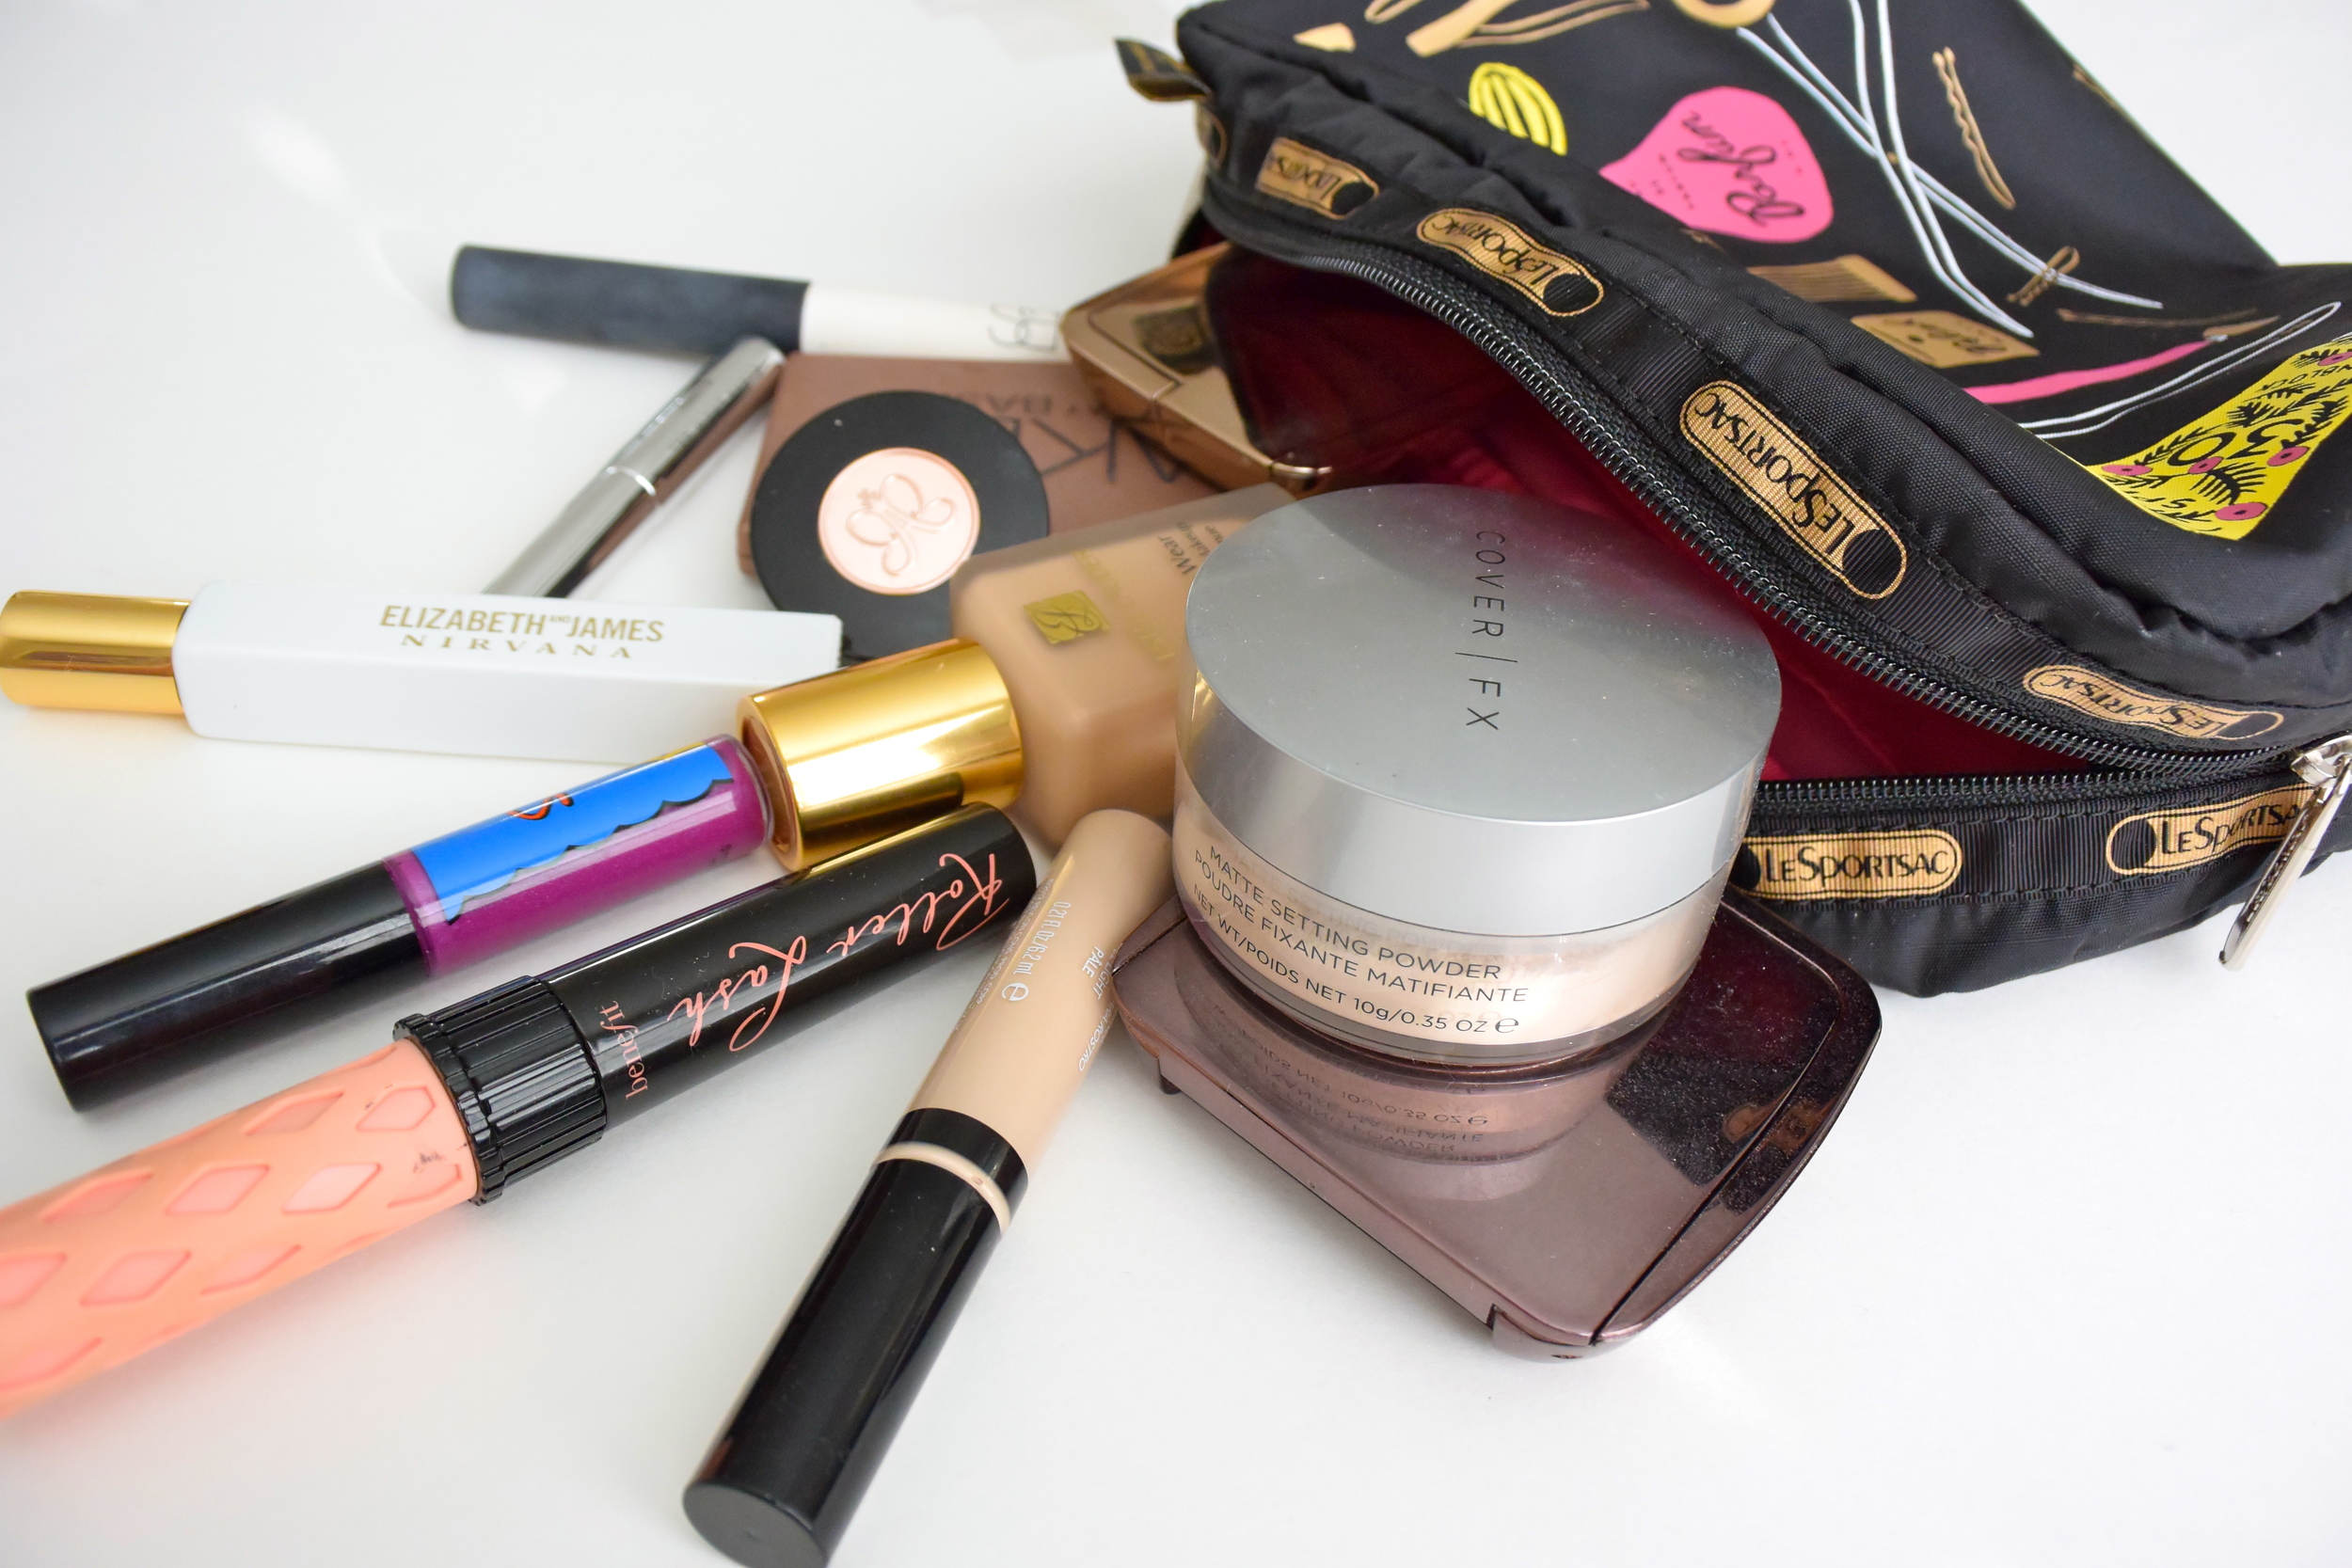 Whats in my travel makeup bag?